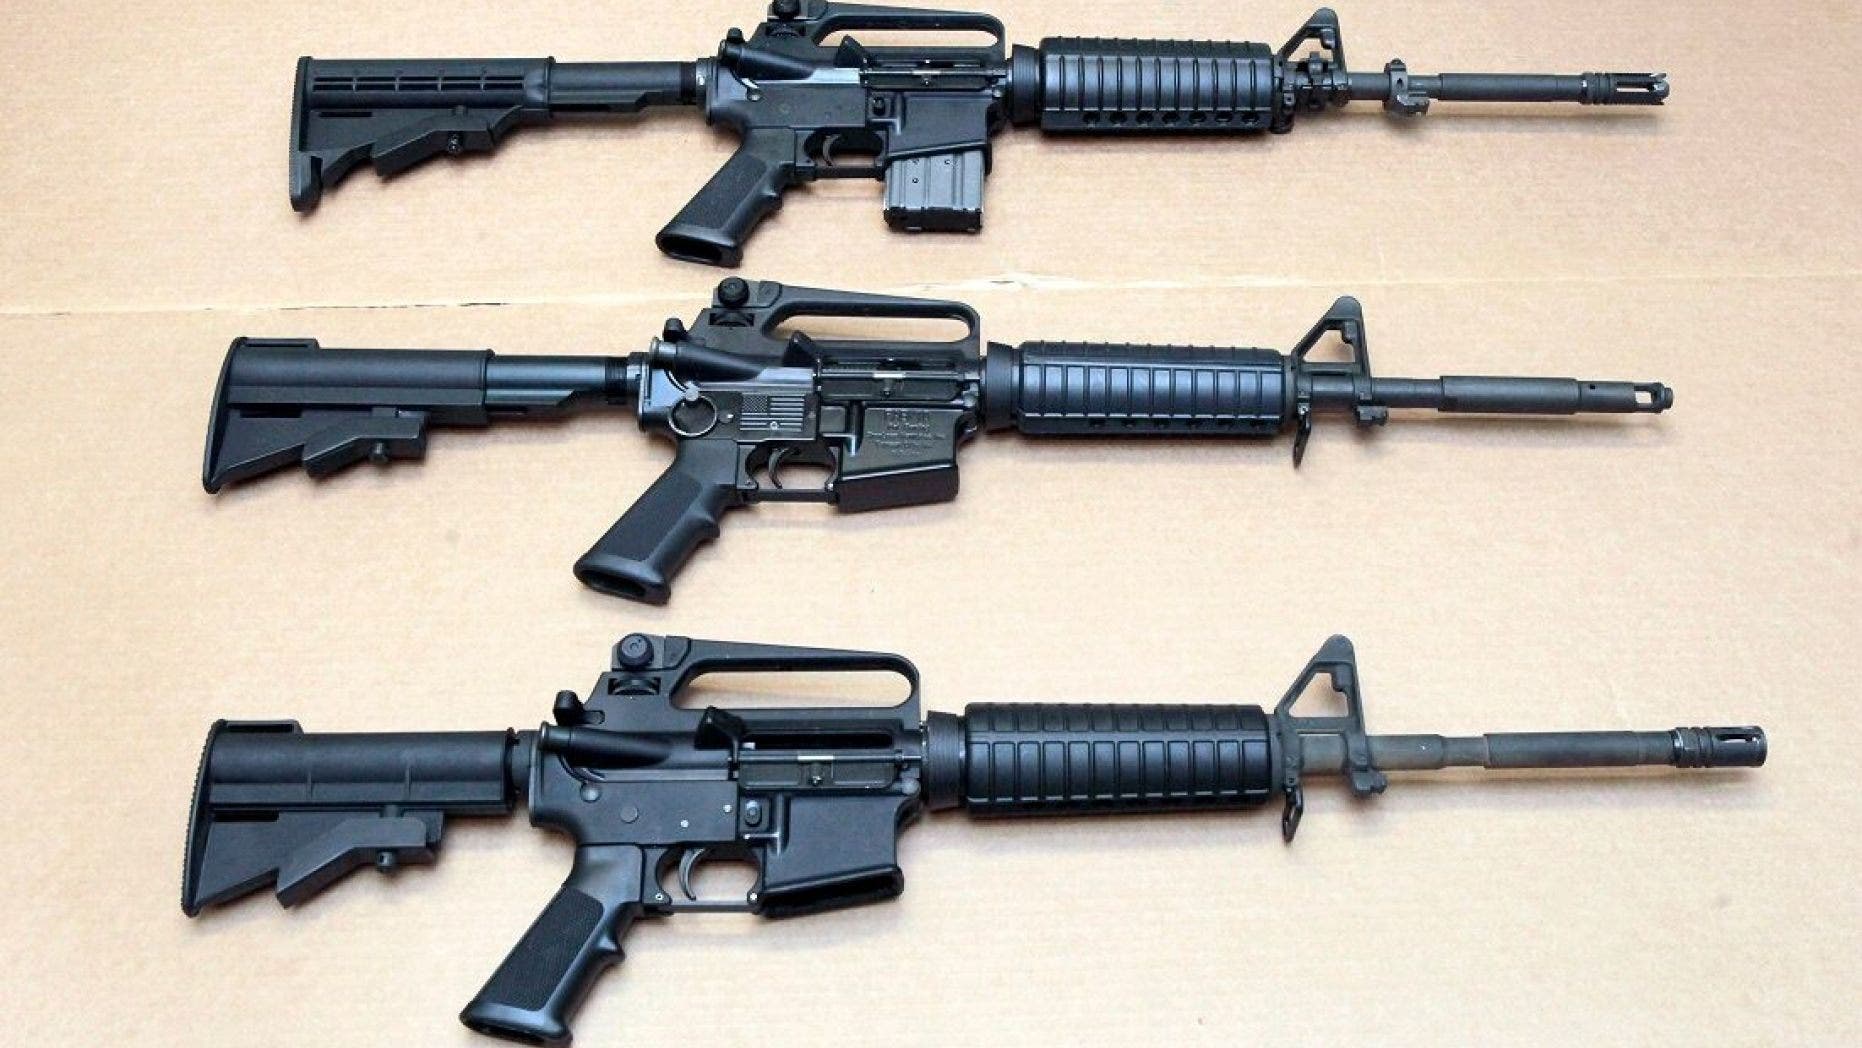 Washington Post editor flamed for claiming the AR-15 rifle was ‘invented for’ the Nazis